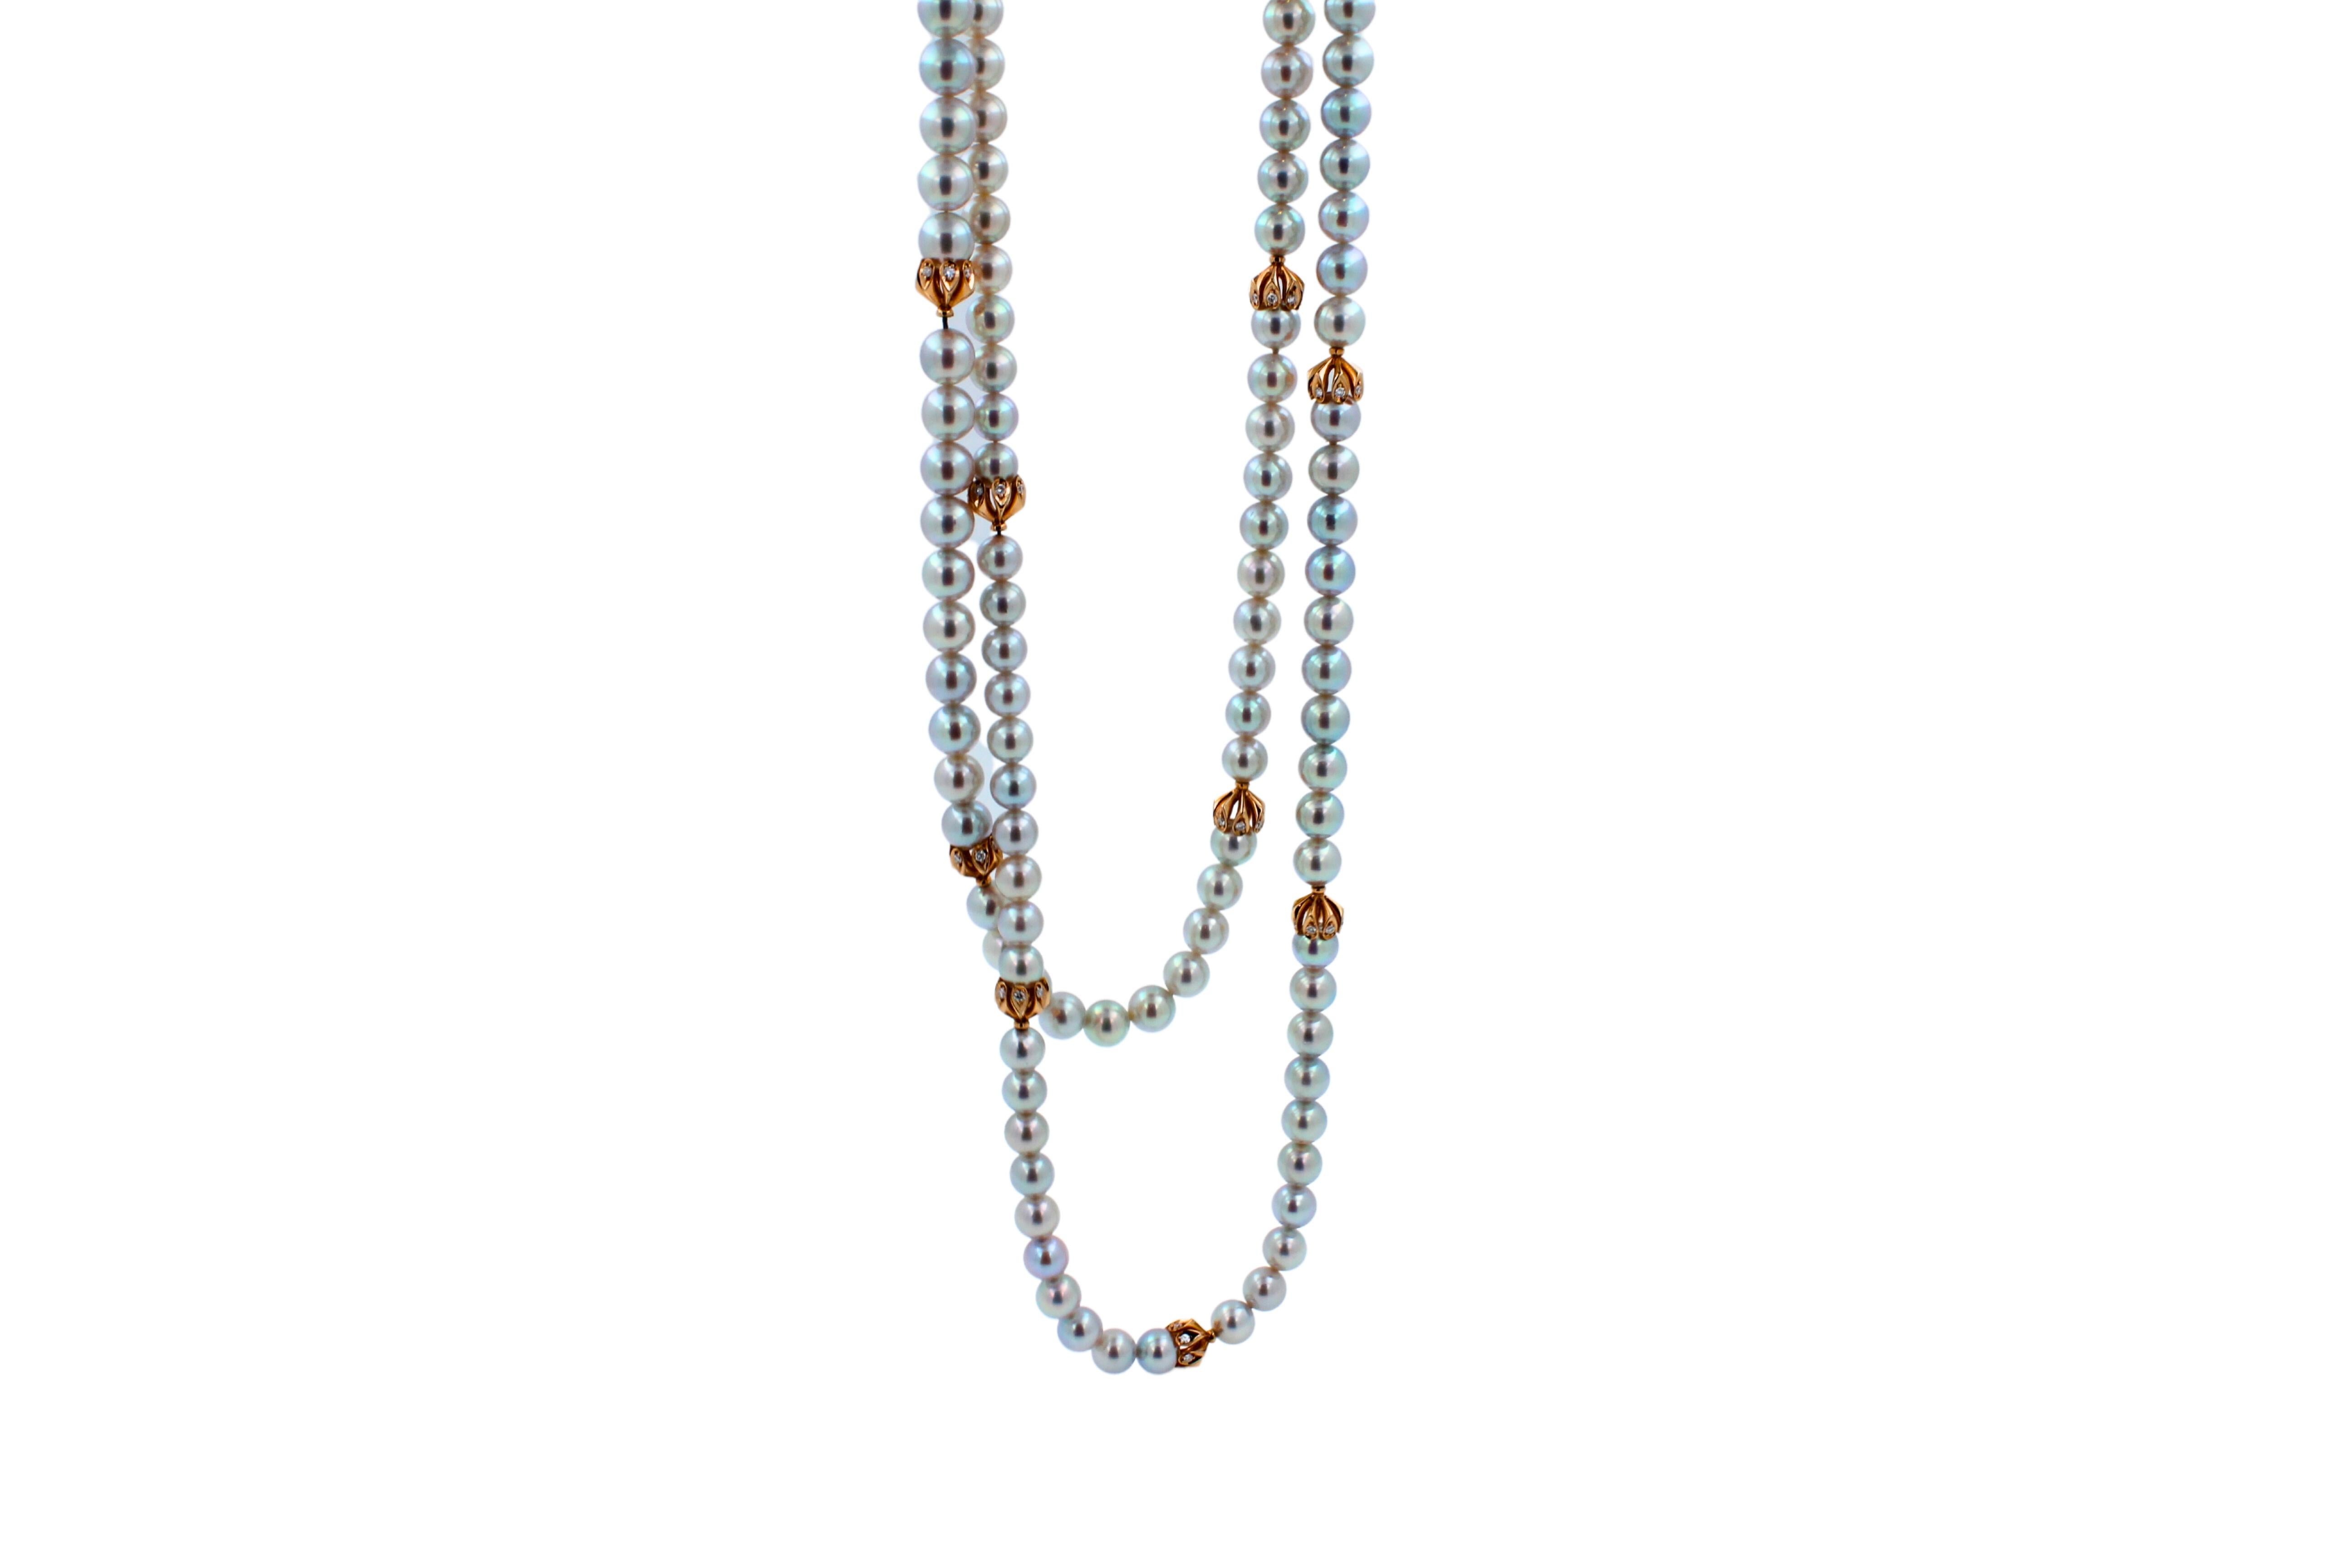 Akoya Pearl & Diamonds Unending Bubbles Long Necklace

Japanese Akoya White Glow Pearl Long 18 Karat Rose Gold Diamond Bead Necklace

Each pearl is hand- picked and matched to ensure perfect harmony in color and size to create lively jewellery. Fun